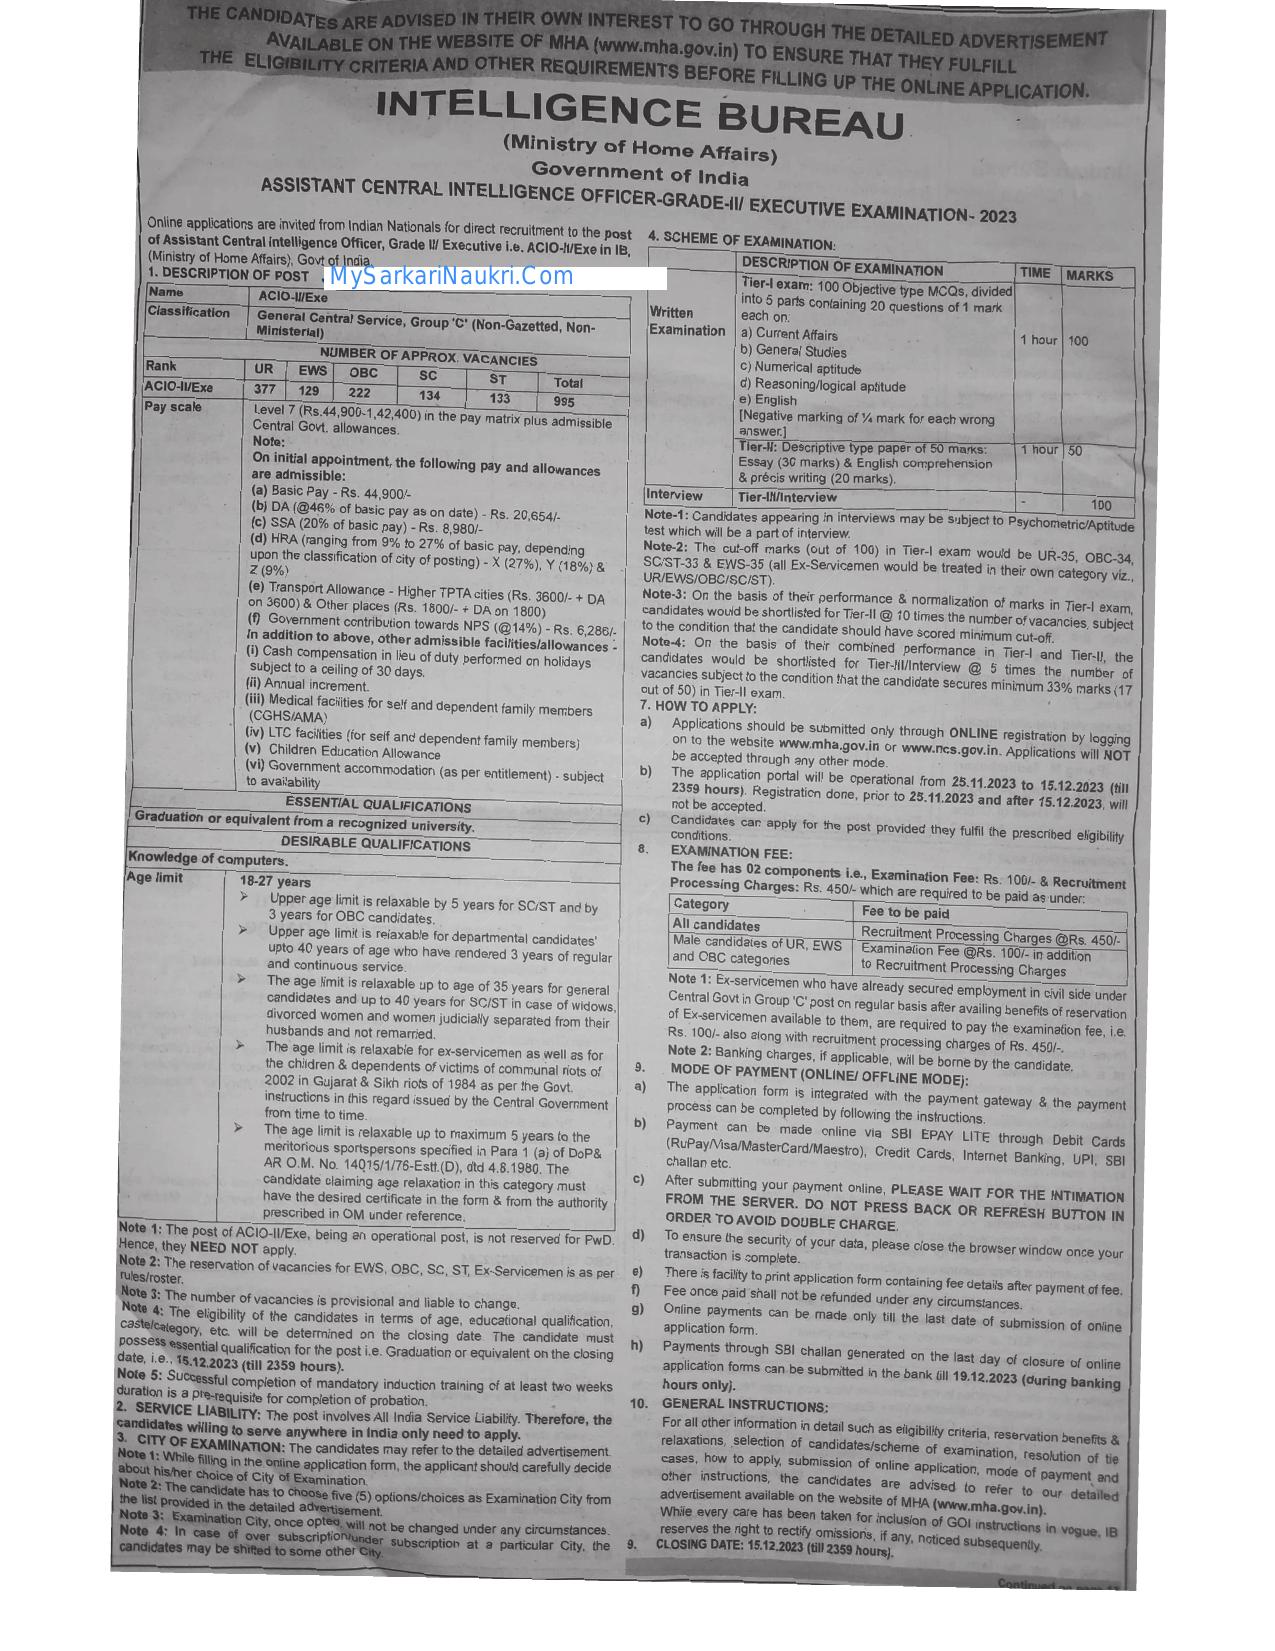 IB Assistant Central Intelligence Officer (ACIO) Recruitment 2023 - Page 2